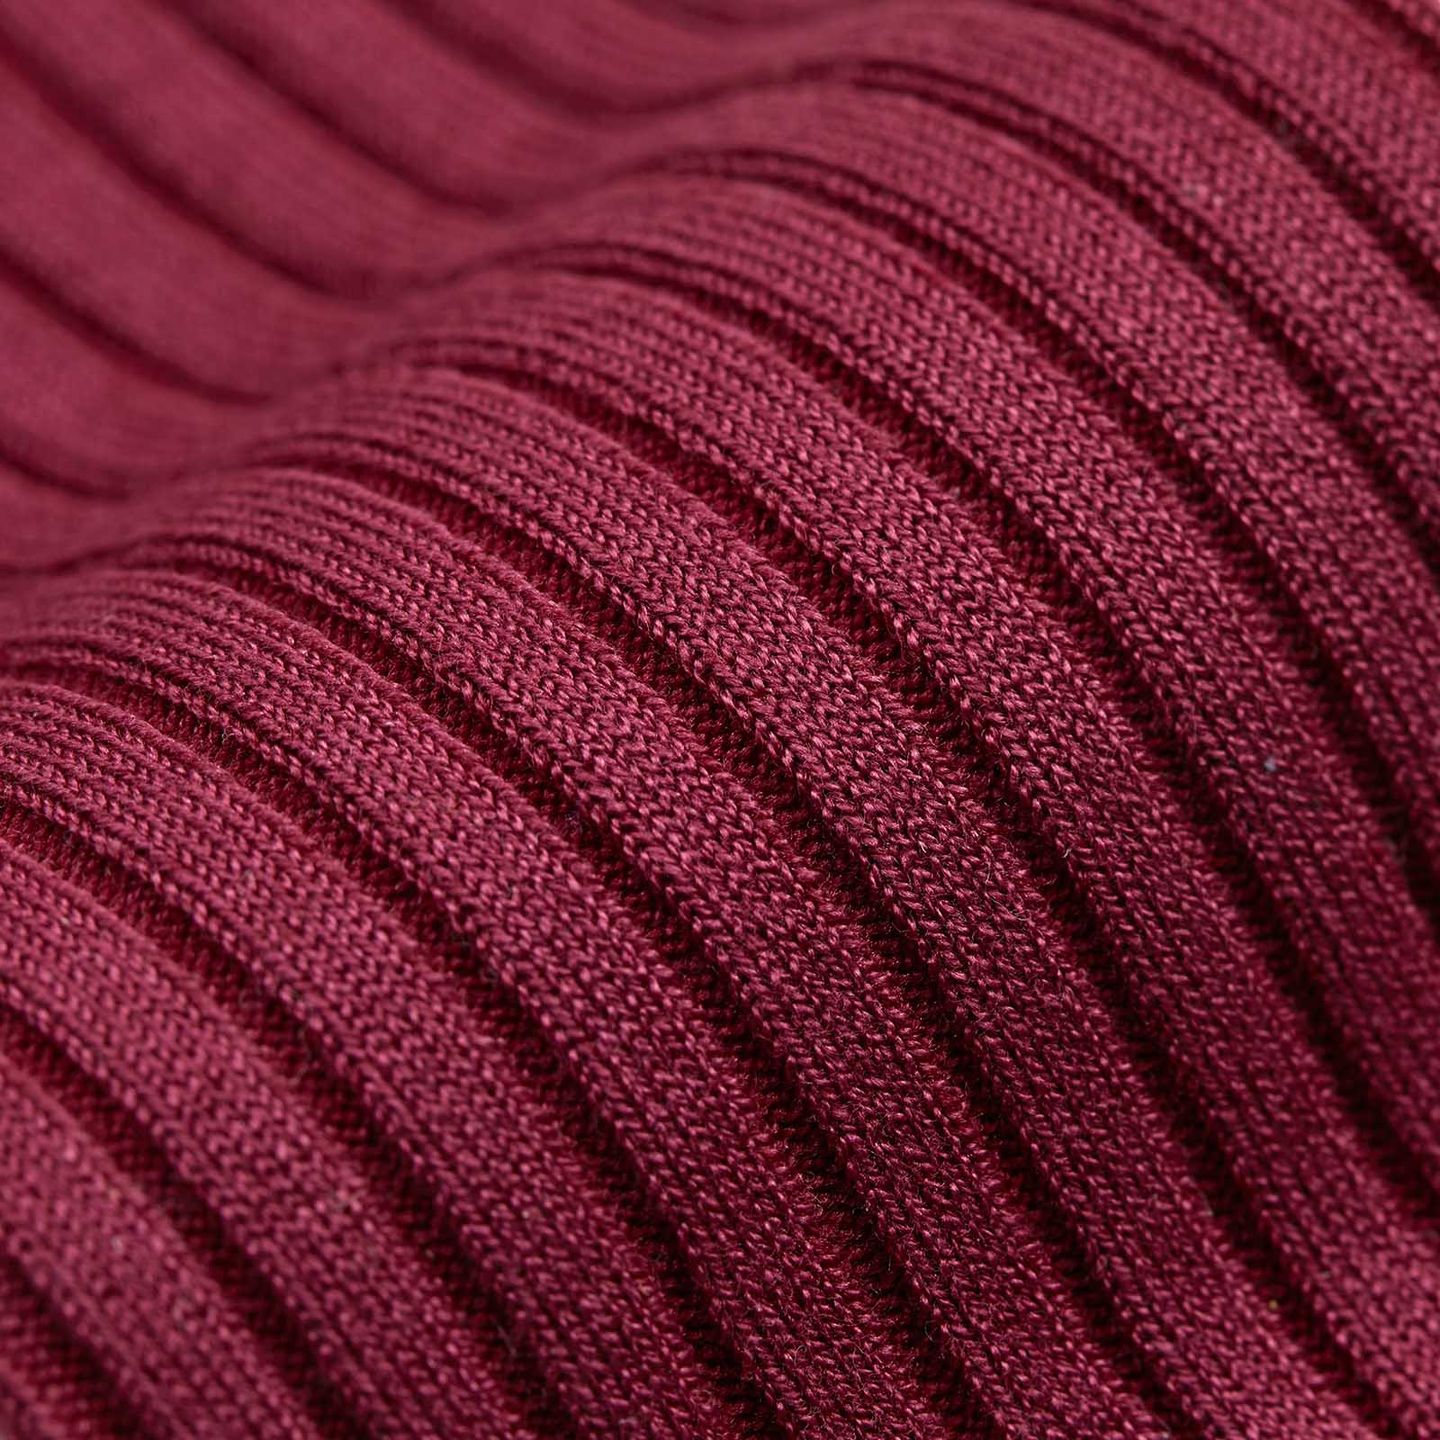 A close up of stripes on a red sock